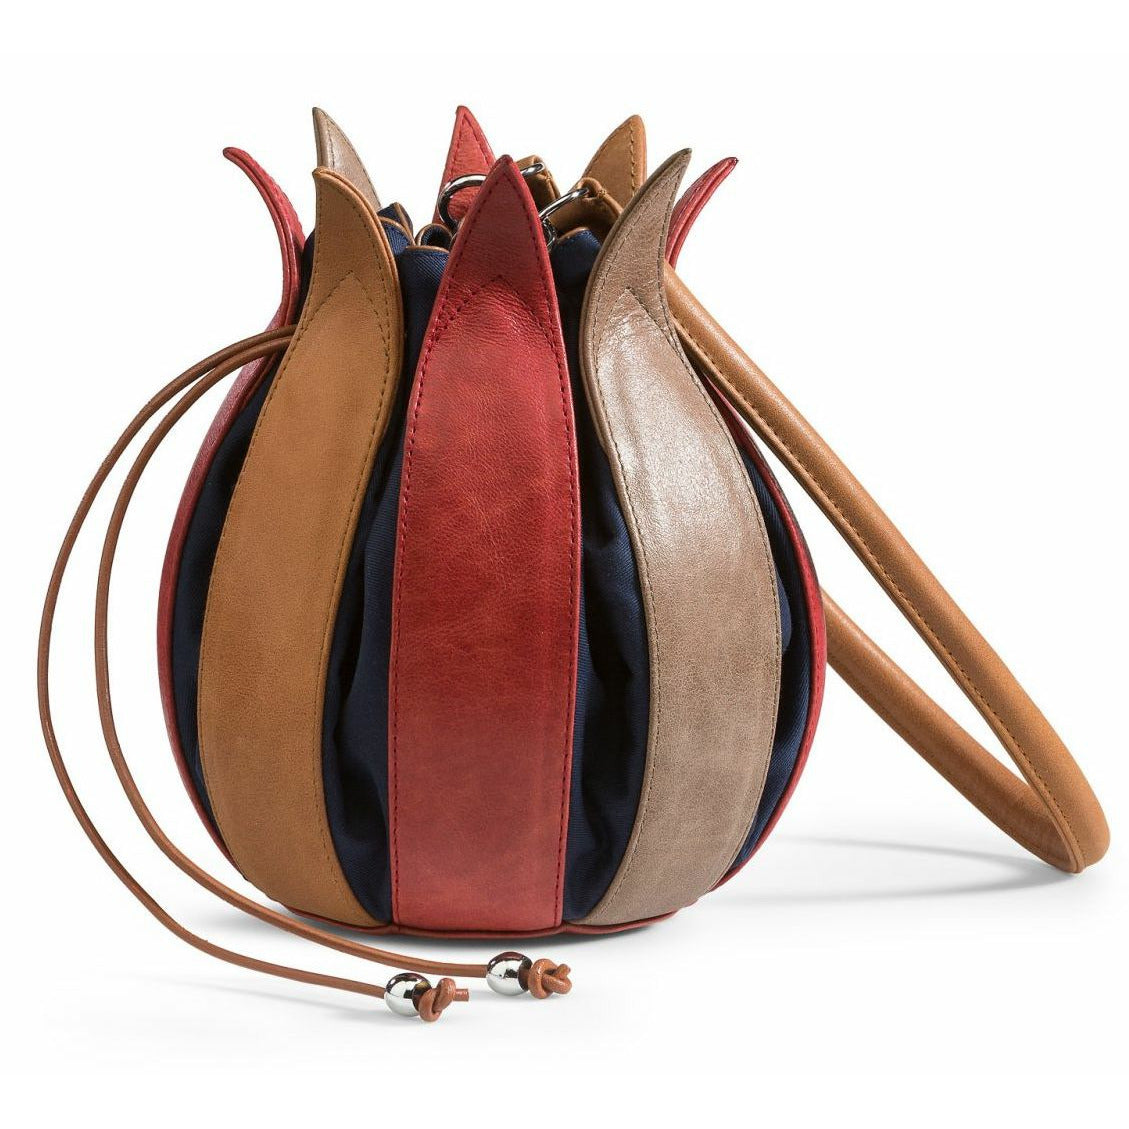 By-Lin Tulip Leather Bag - Red/Cognac/Taupe